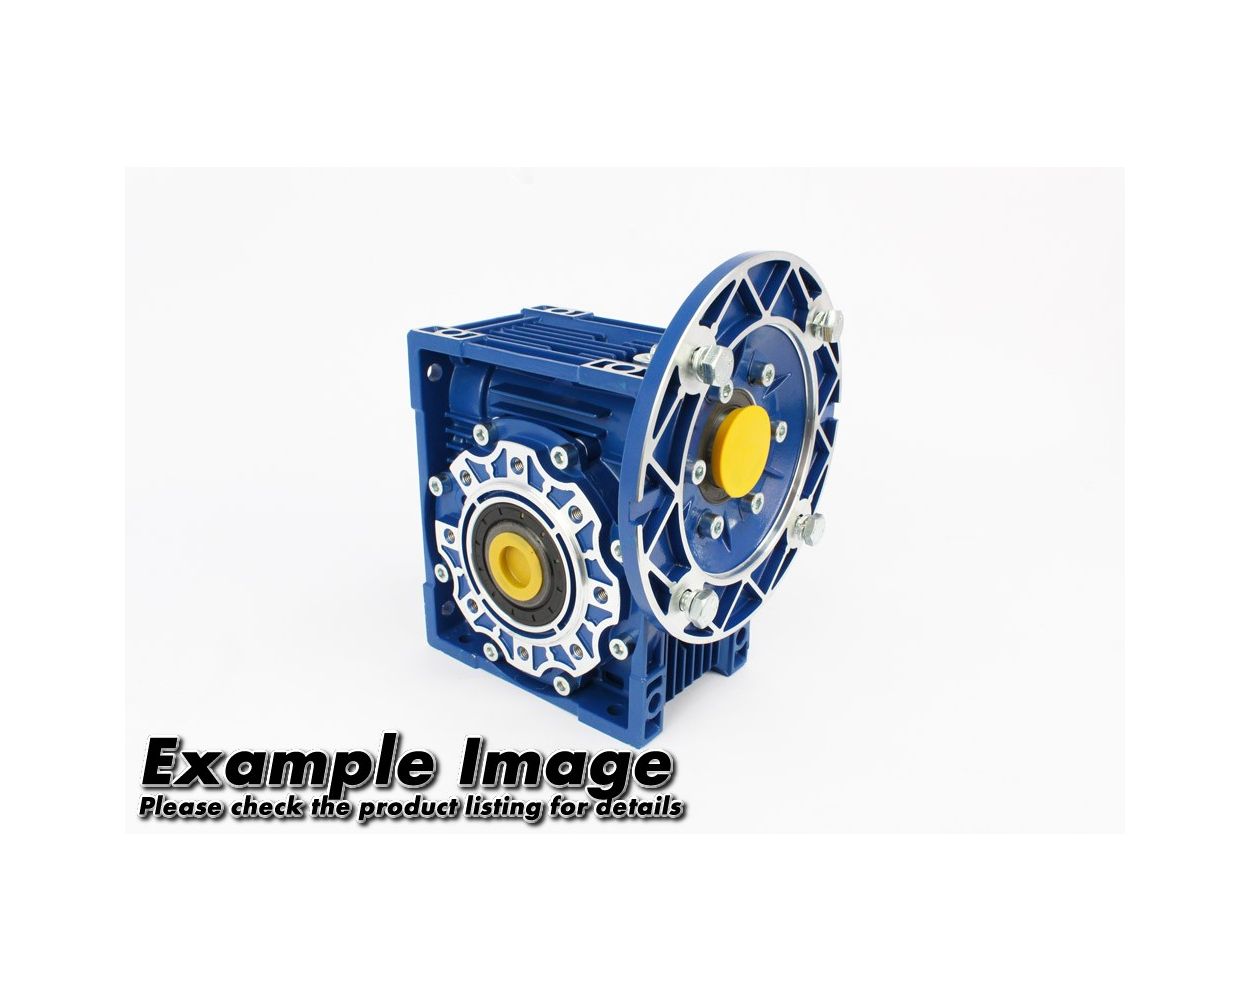 Worm gear unit size 150 ratio 100:1 with 100/112B5 flange